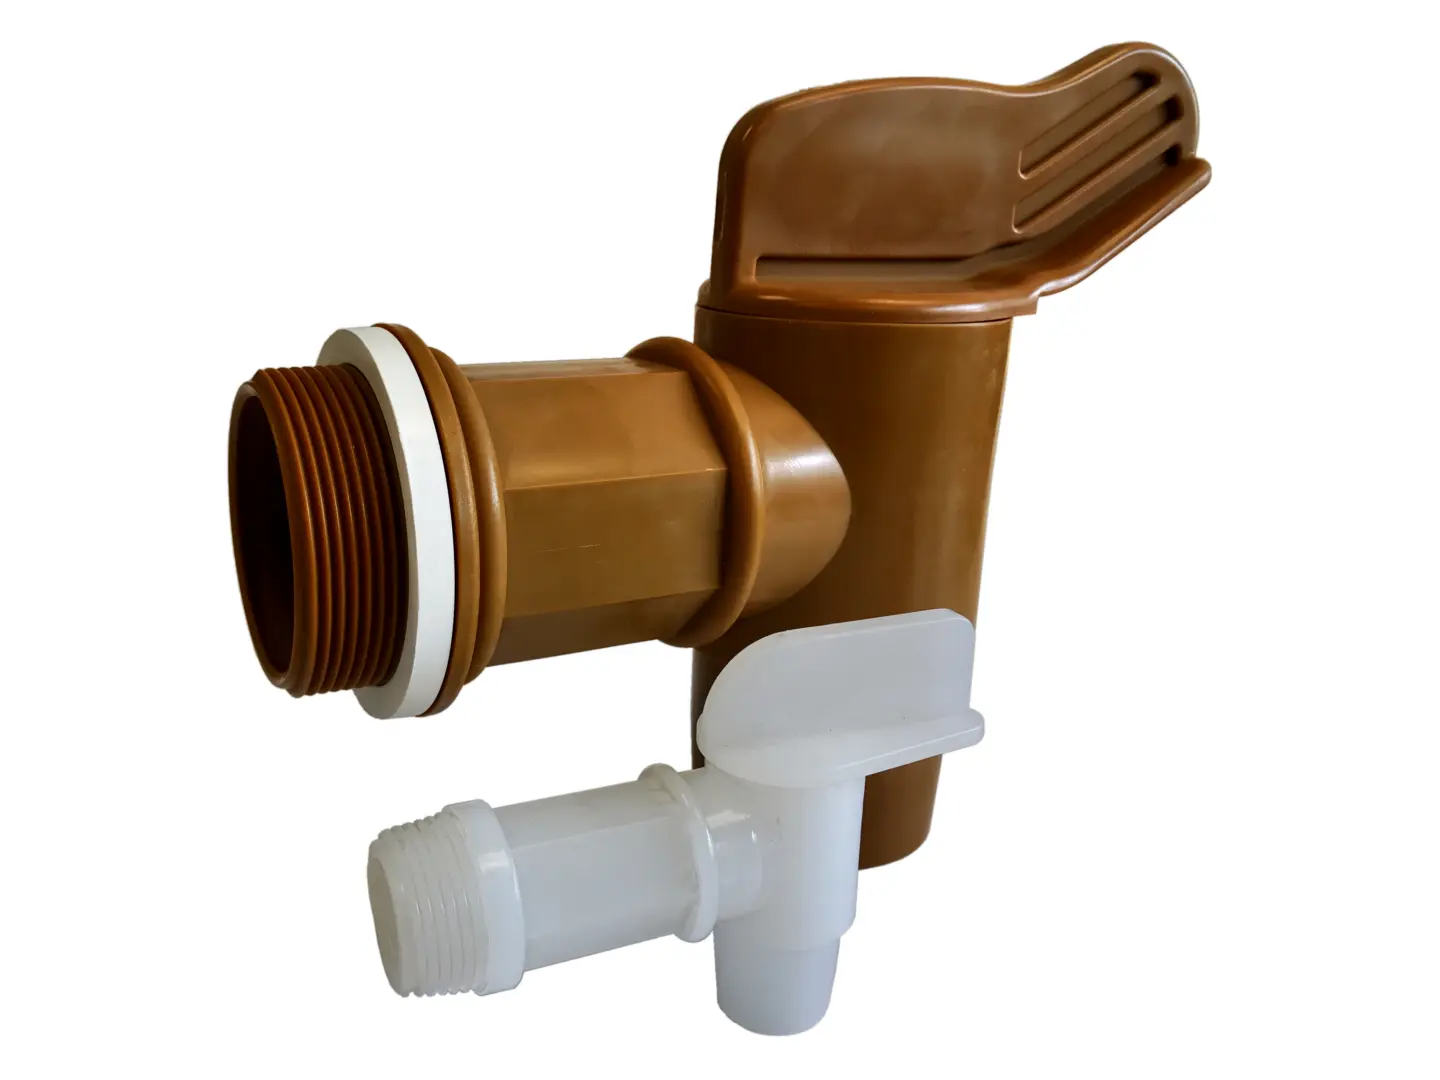 Poly Drum Faucets - Models 68-20 and 68-75 shown